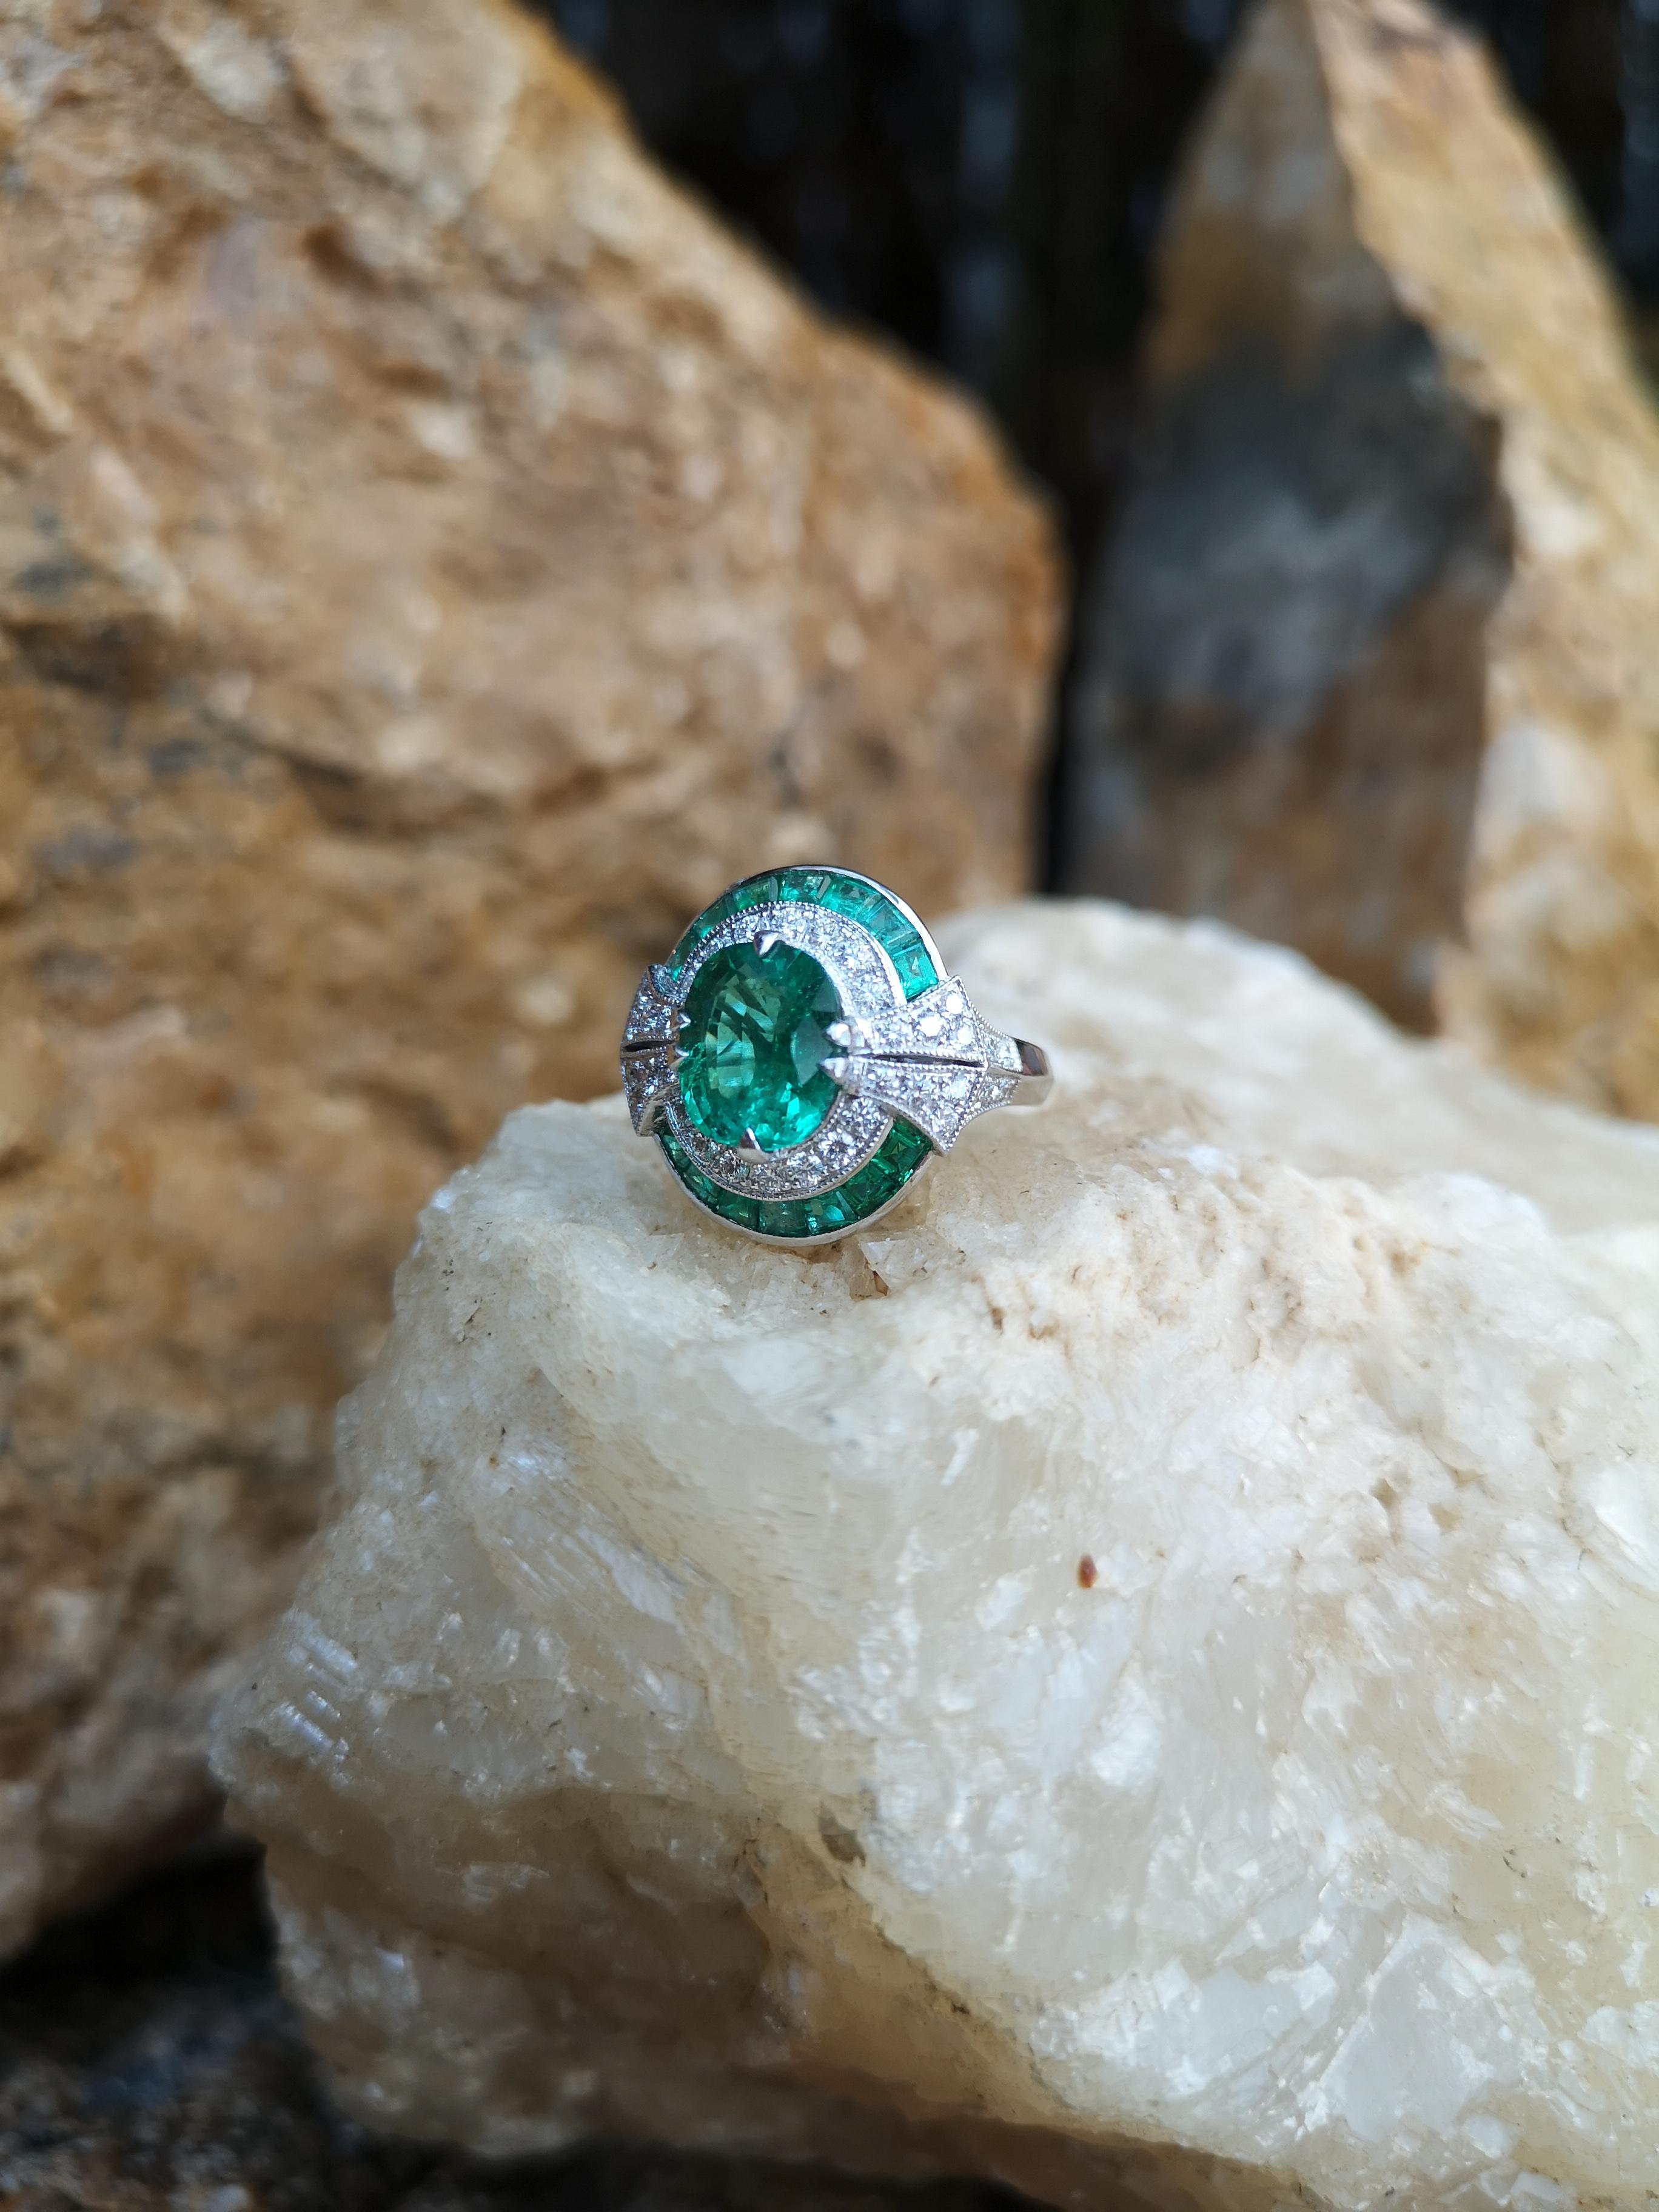 Emerald 2.44 carats, Emerald 1.15 carats with Diamond 0.64 carat Ring set in 18 Karat White Gold Settings 

Width: 1.8 cm
Length: 1.8 cm 
Ring Size: 50

